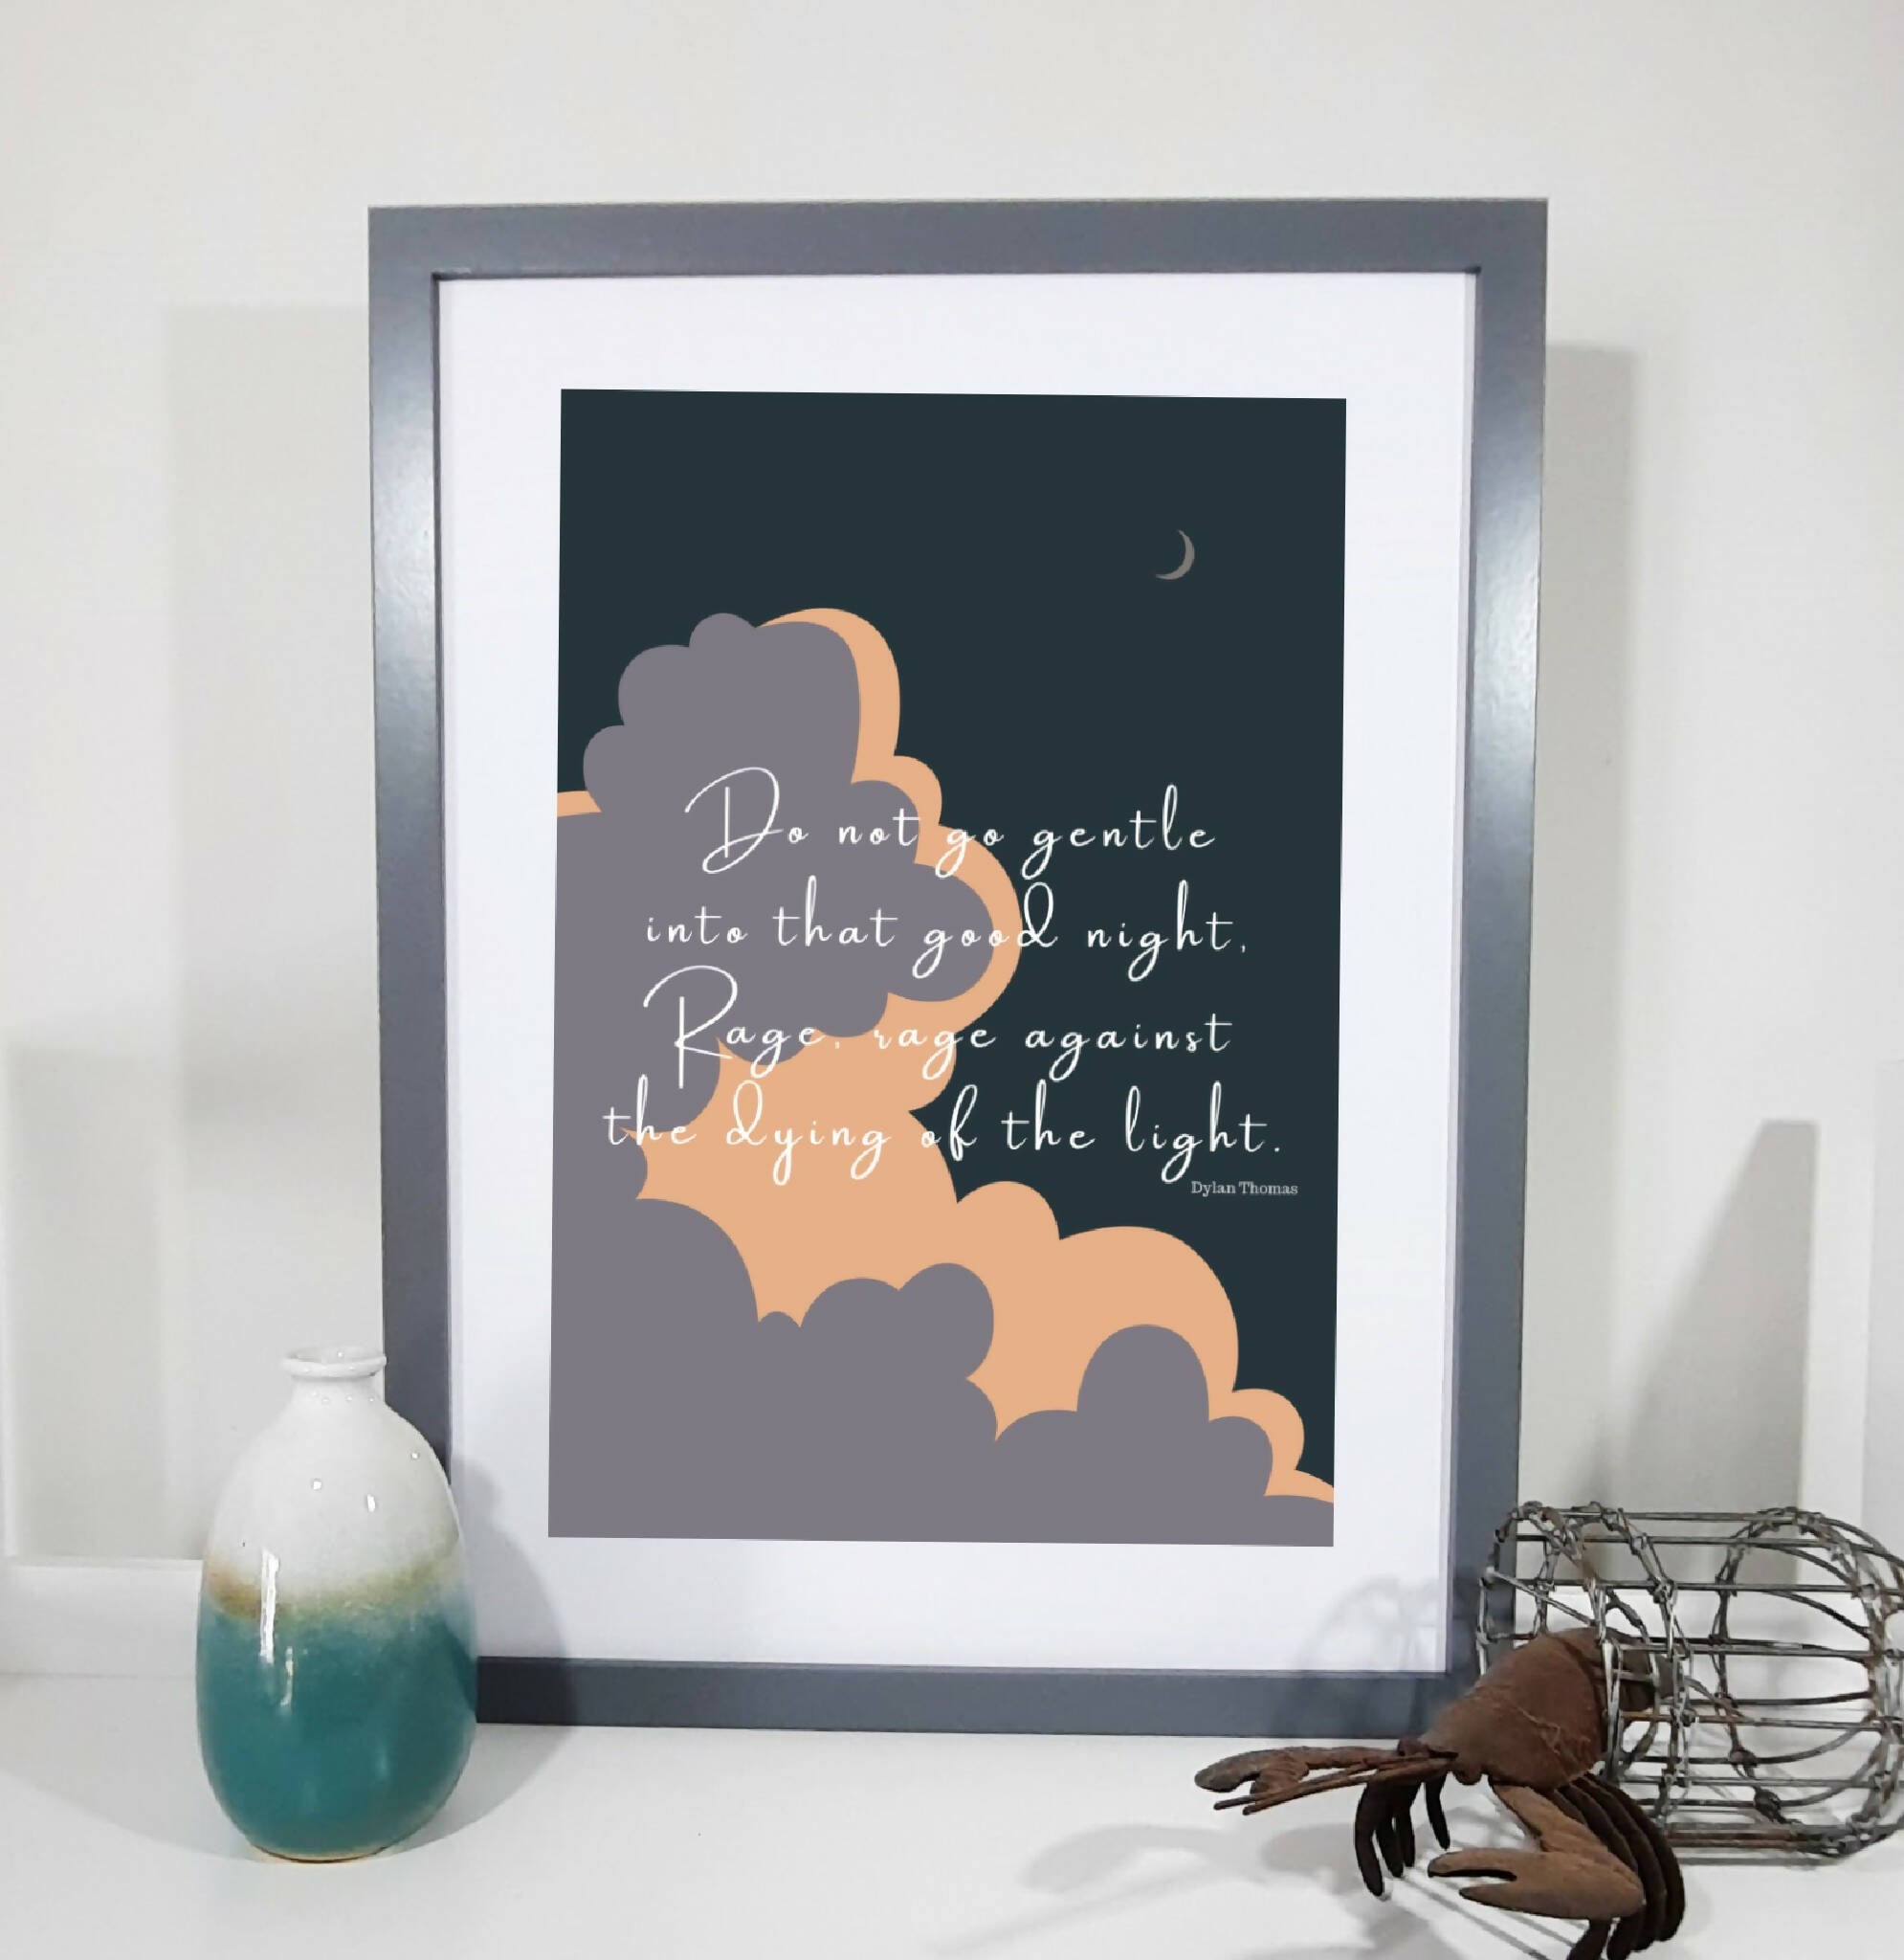 Dylan Thomas 'Do not go gentle into that good night' Welsh print, Dylan Thomas print, Welsh Wall art, Welsh poster, Welsh poetry, Digital Art, A5